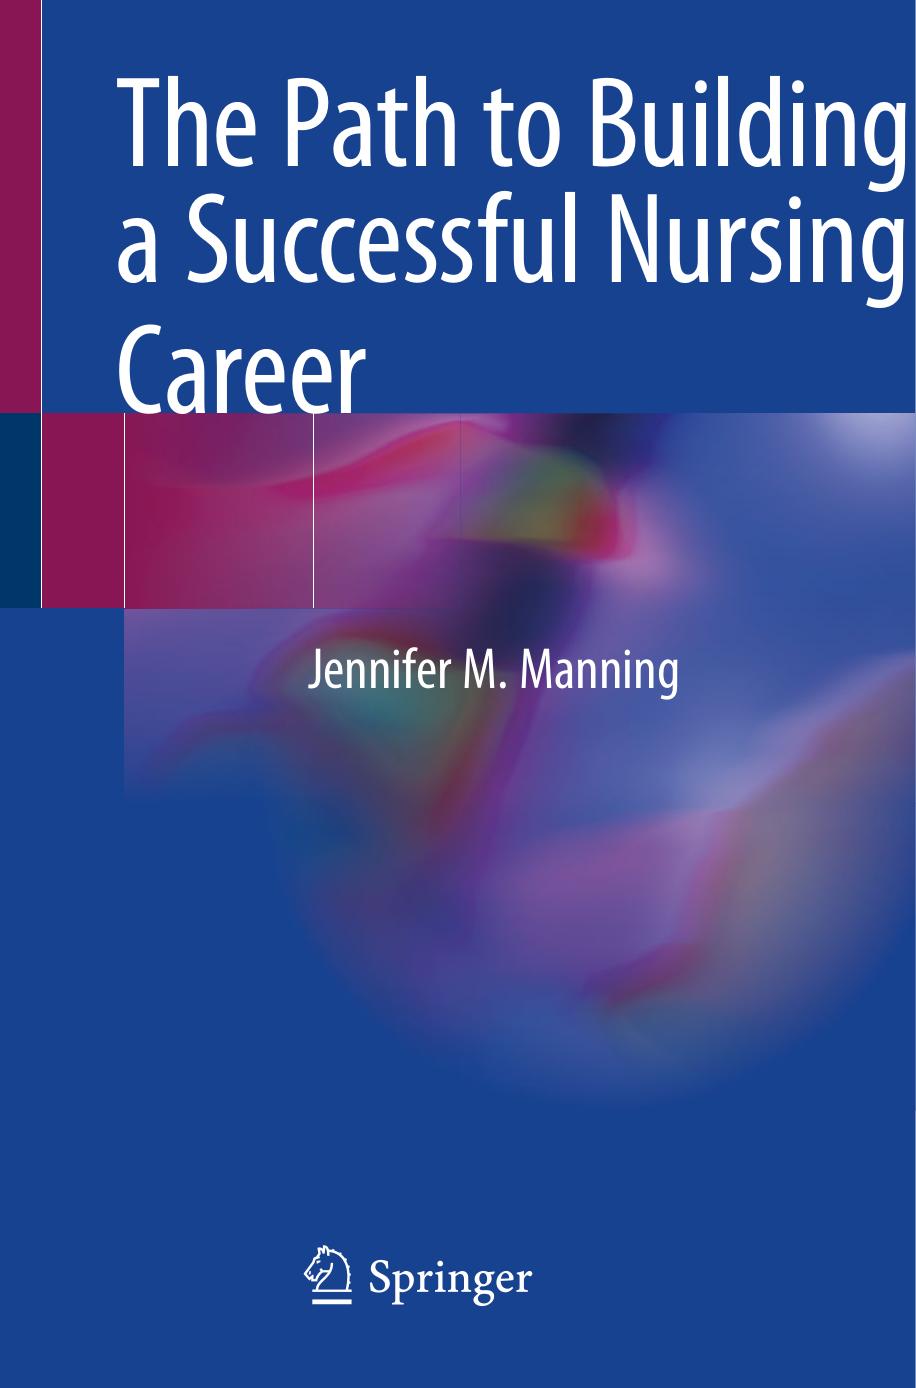 The Path to Building a Successful Nursing Career-Springer International Publishing (2020)